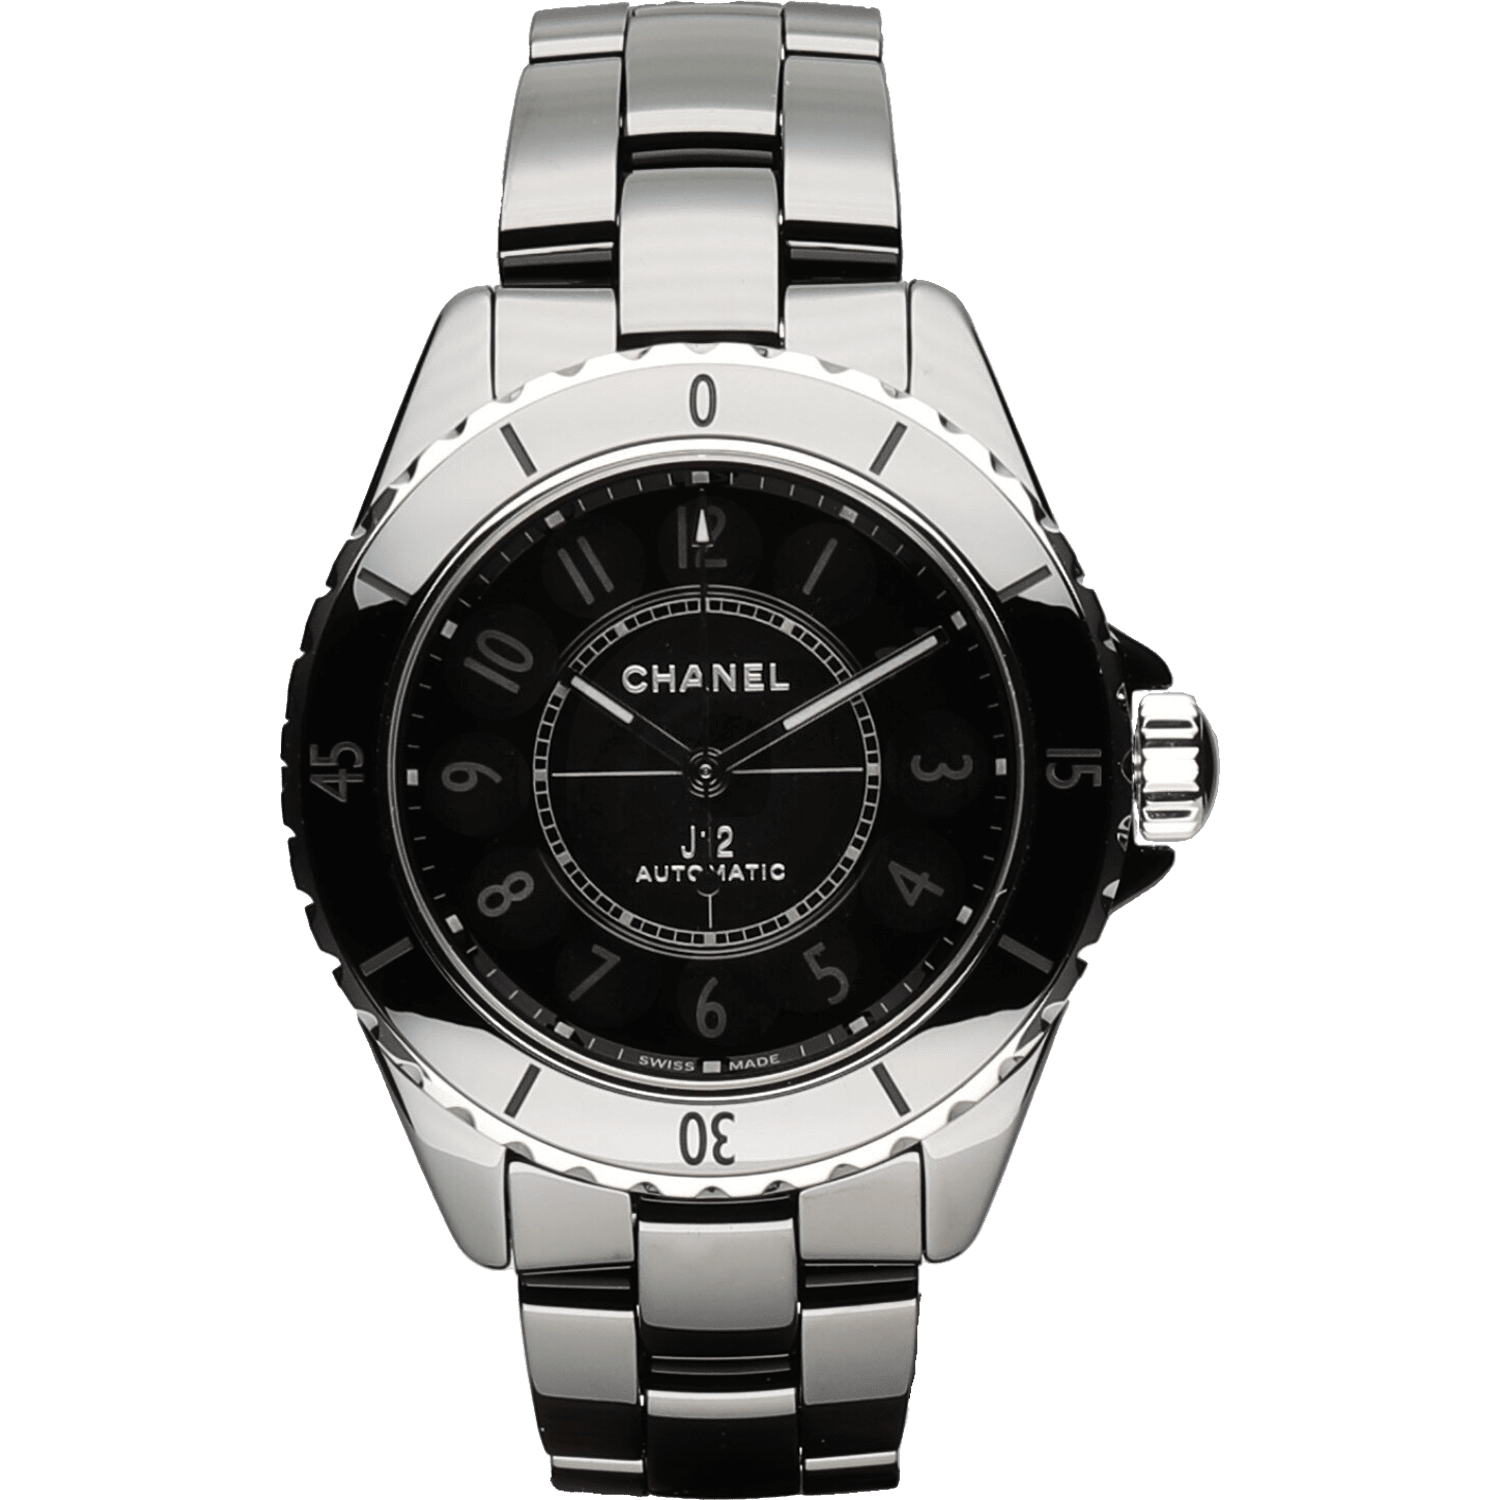 Chanel - H6185 - Orologio J12 Phantom Calibro 12.1, 38 mm - H6185 for  $7,676 for sale from a Trusted Seller on Chrono24